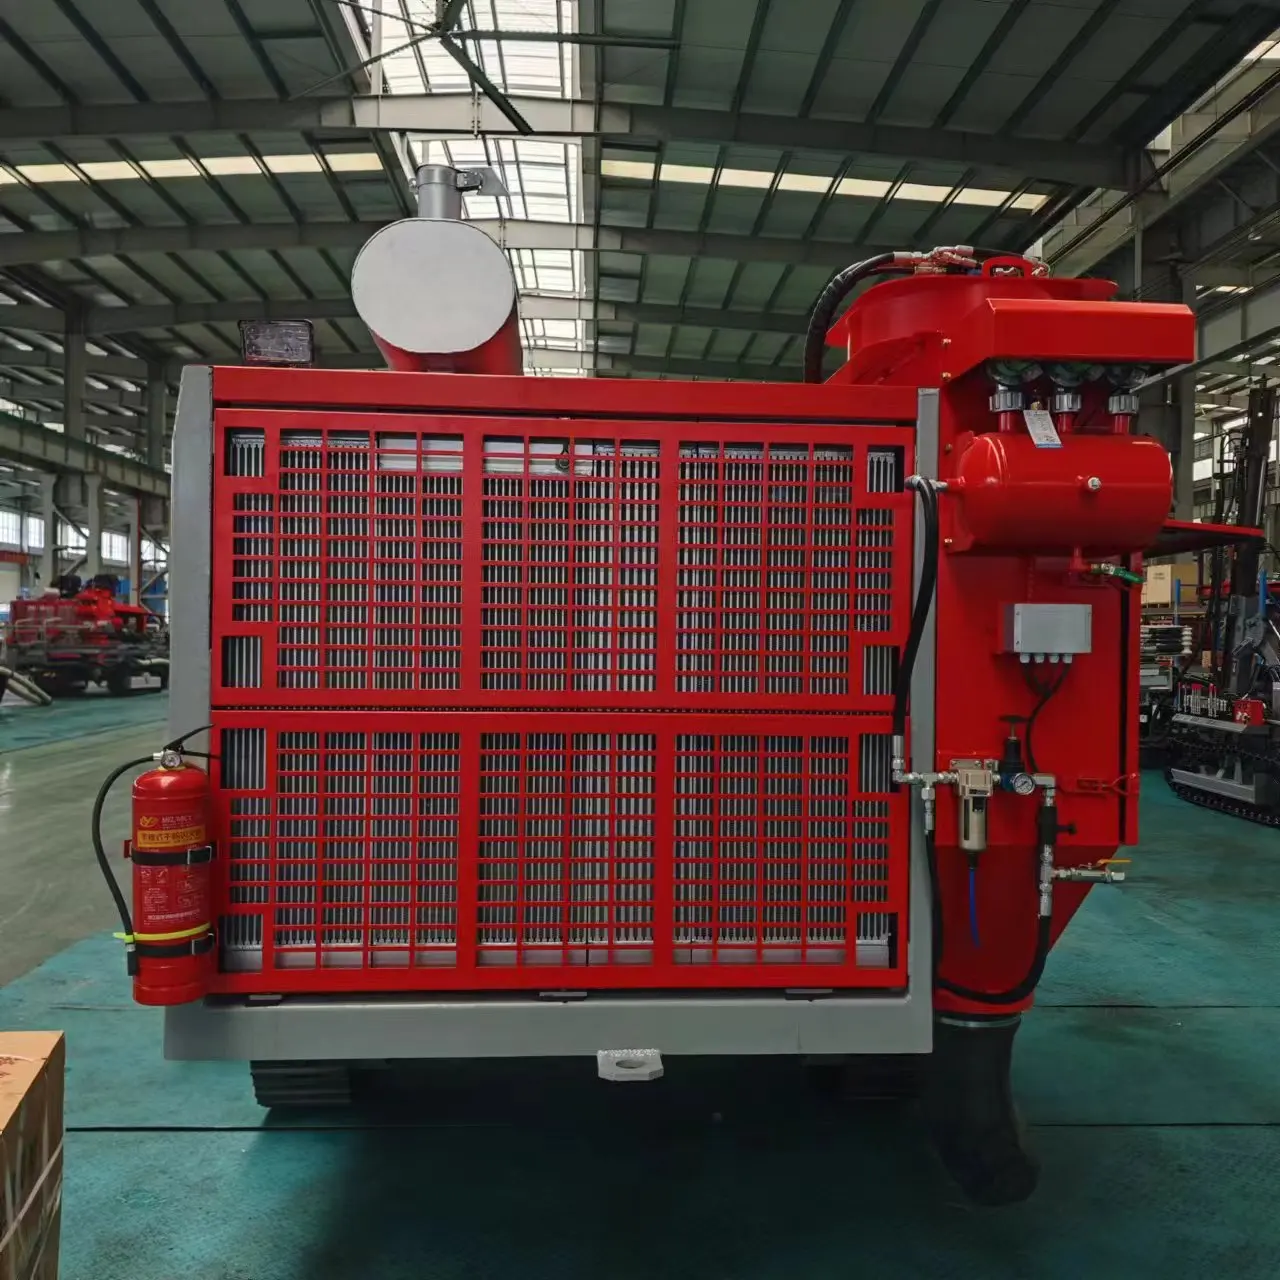 JIEAGood quality B2C DTH hydraulic drilling rig  machine for sale dth mobile pneumatic portable drilling rig